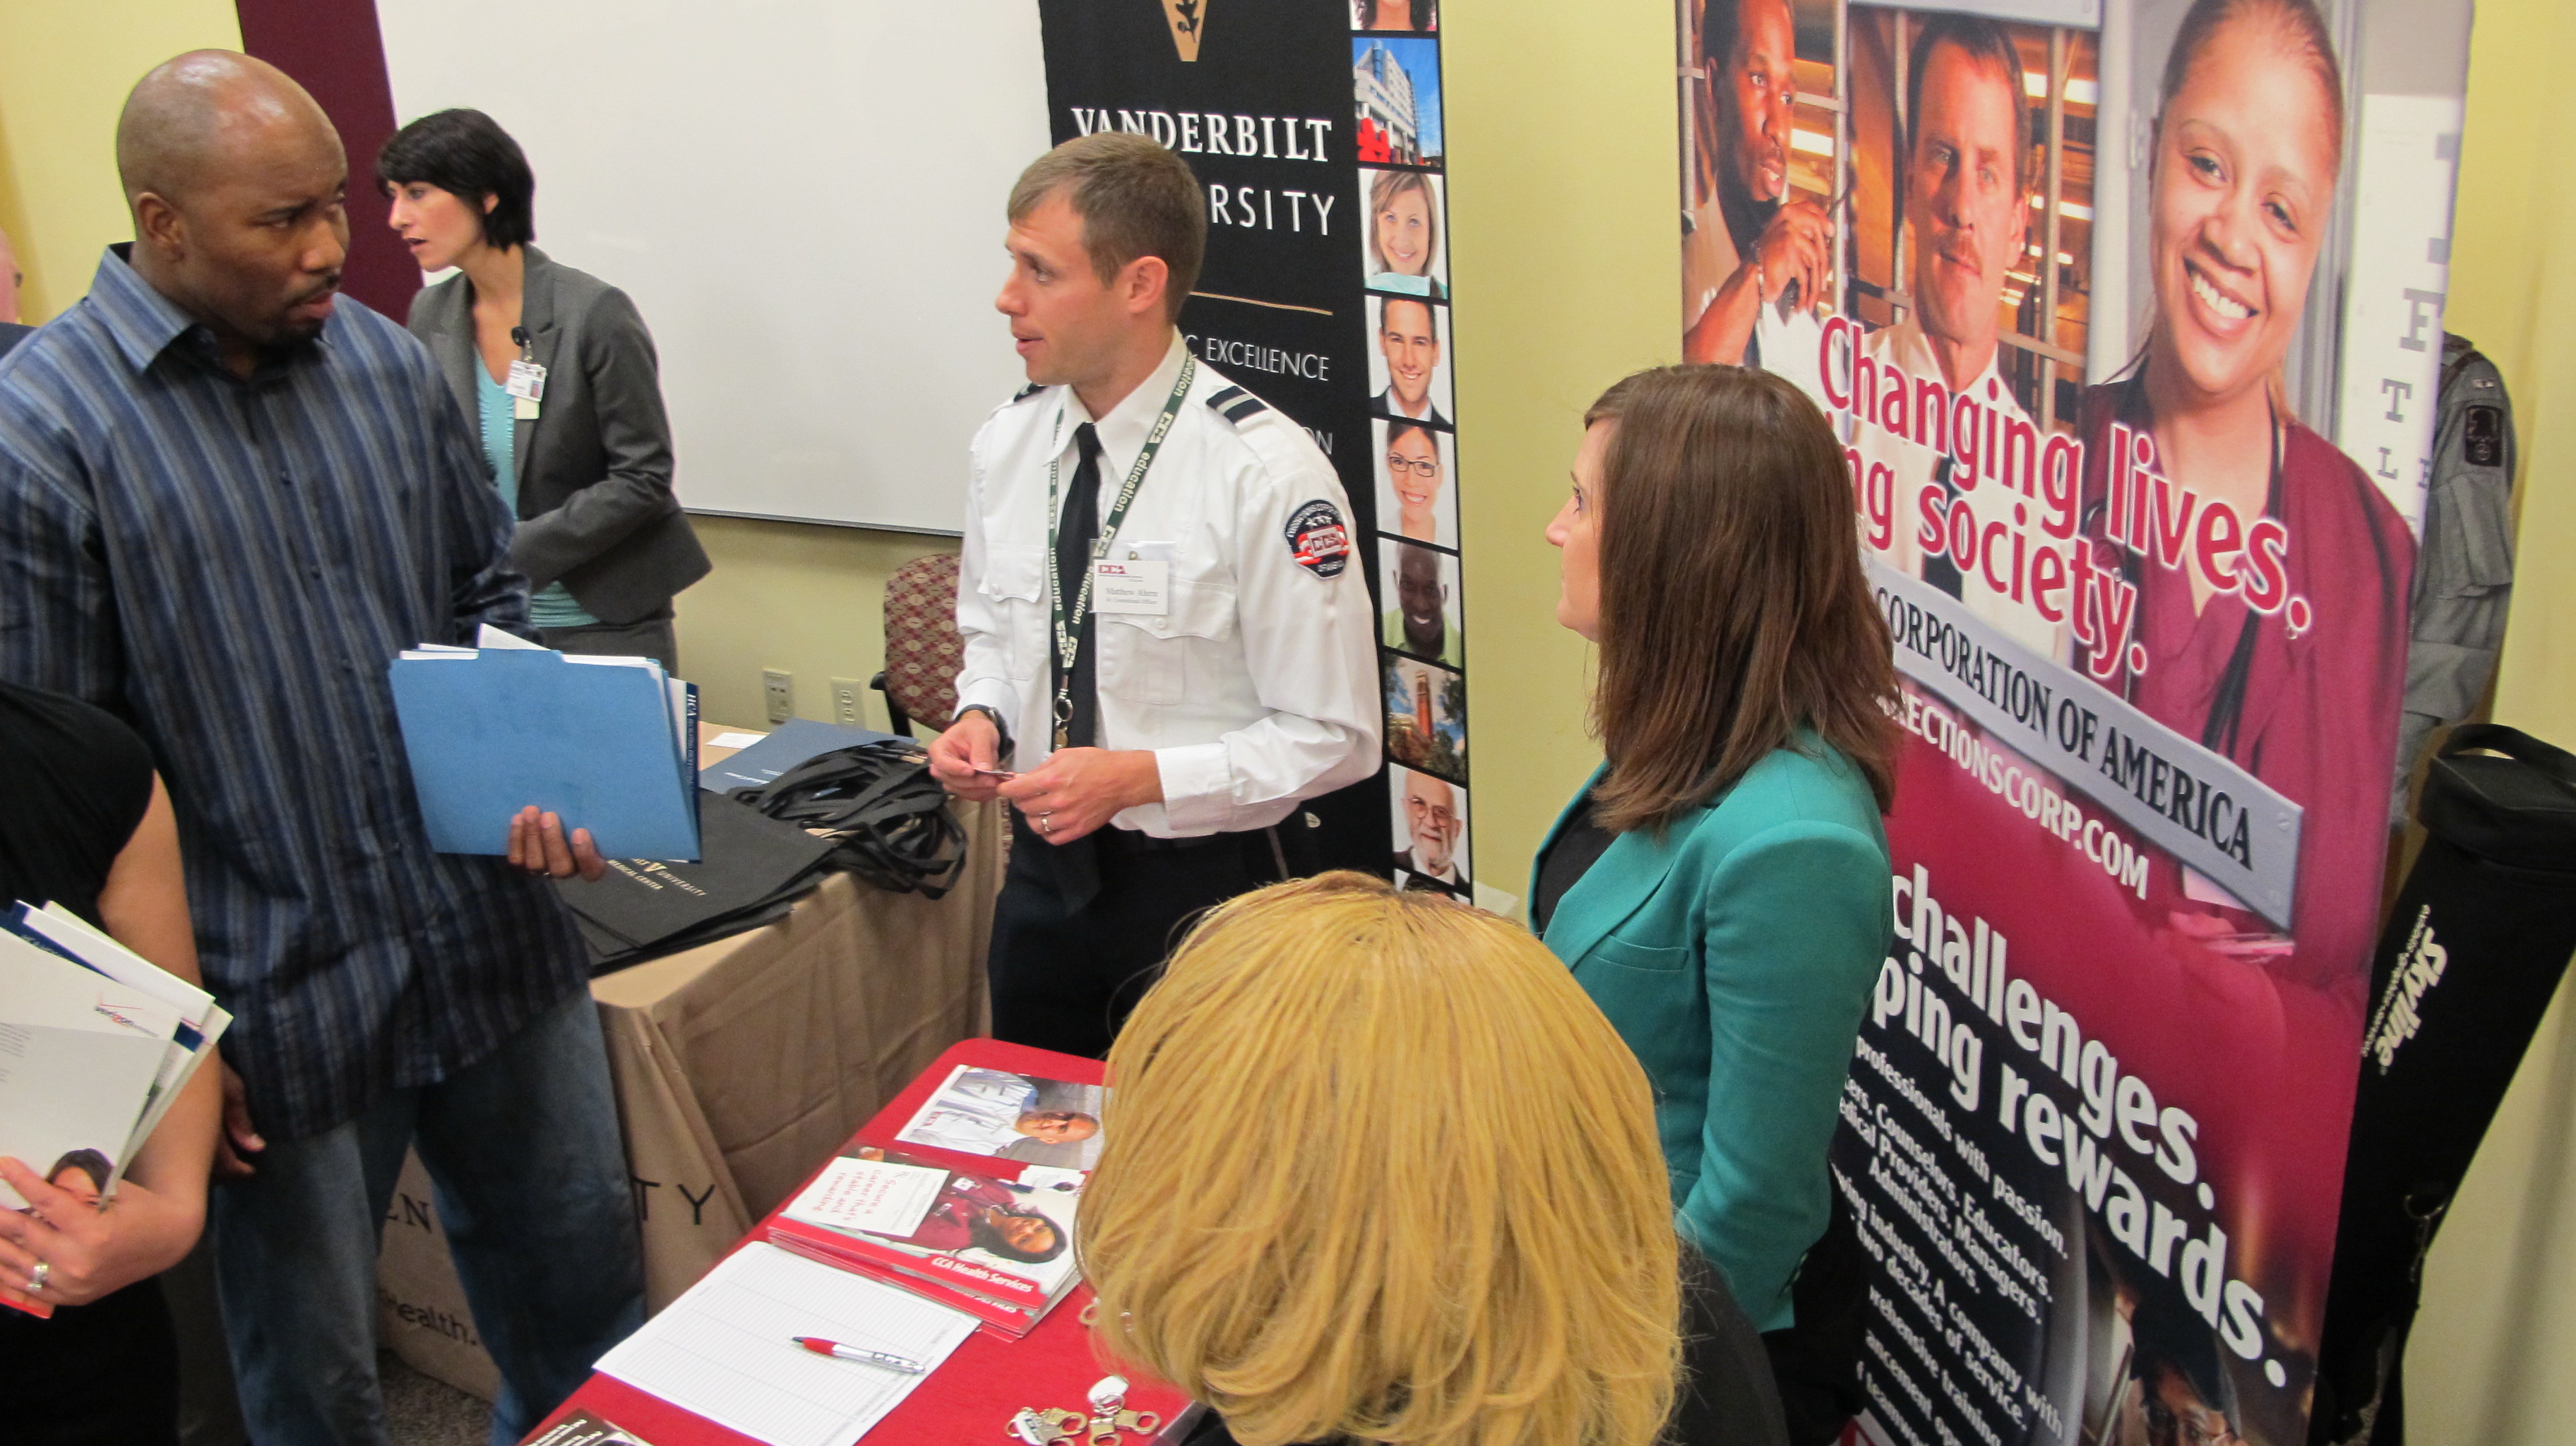 CCA recruiters speak with veterans at Tennessee's Paycheck for Patriots event in Nashville, TN